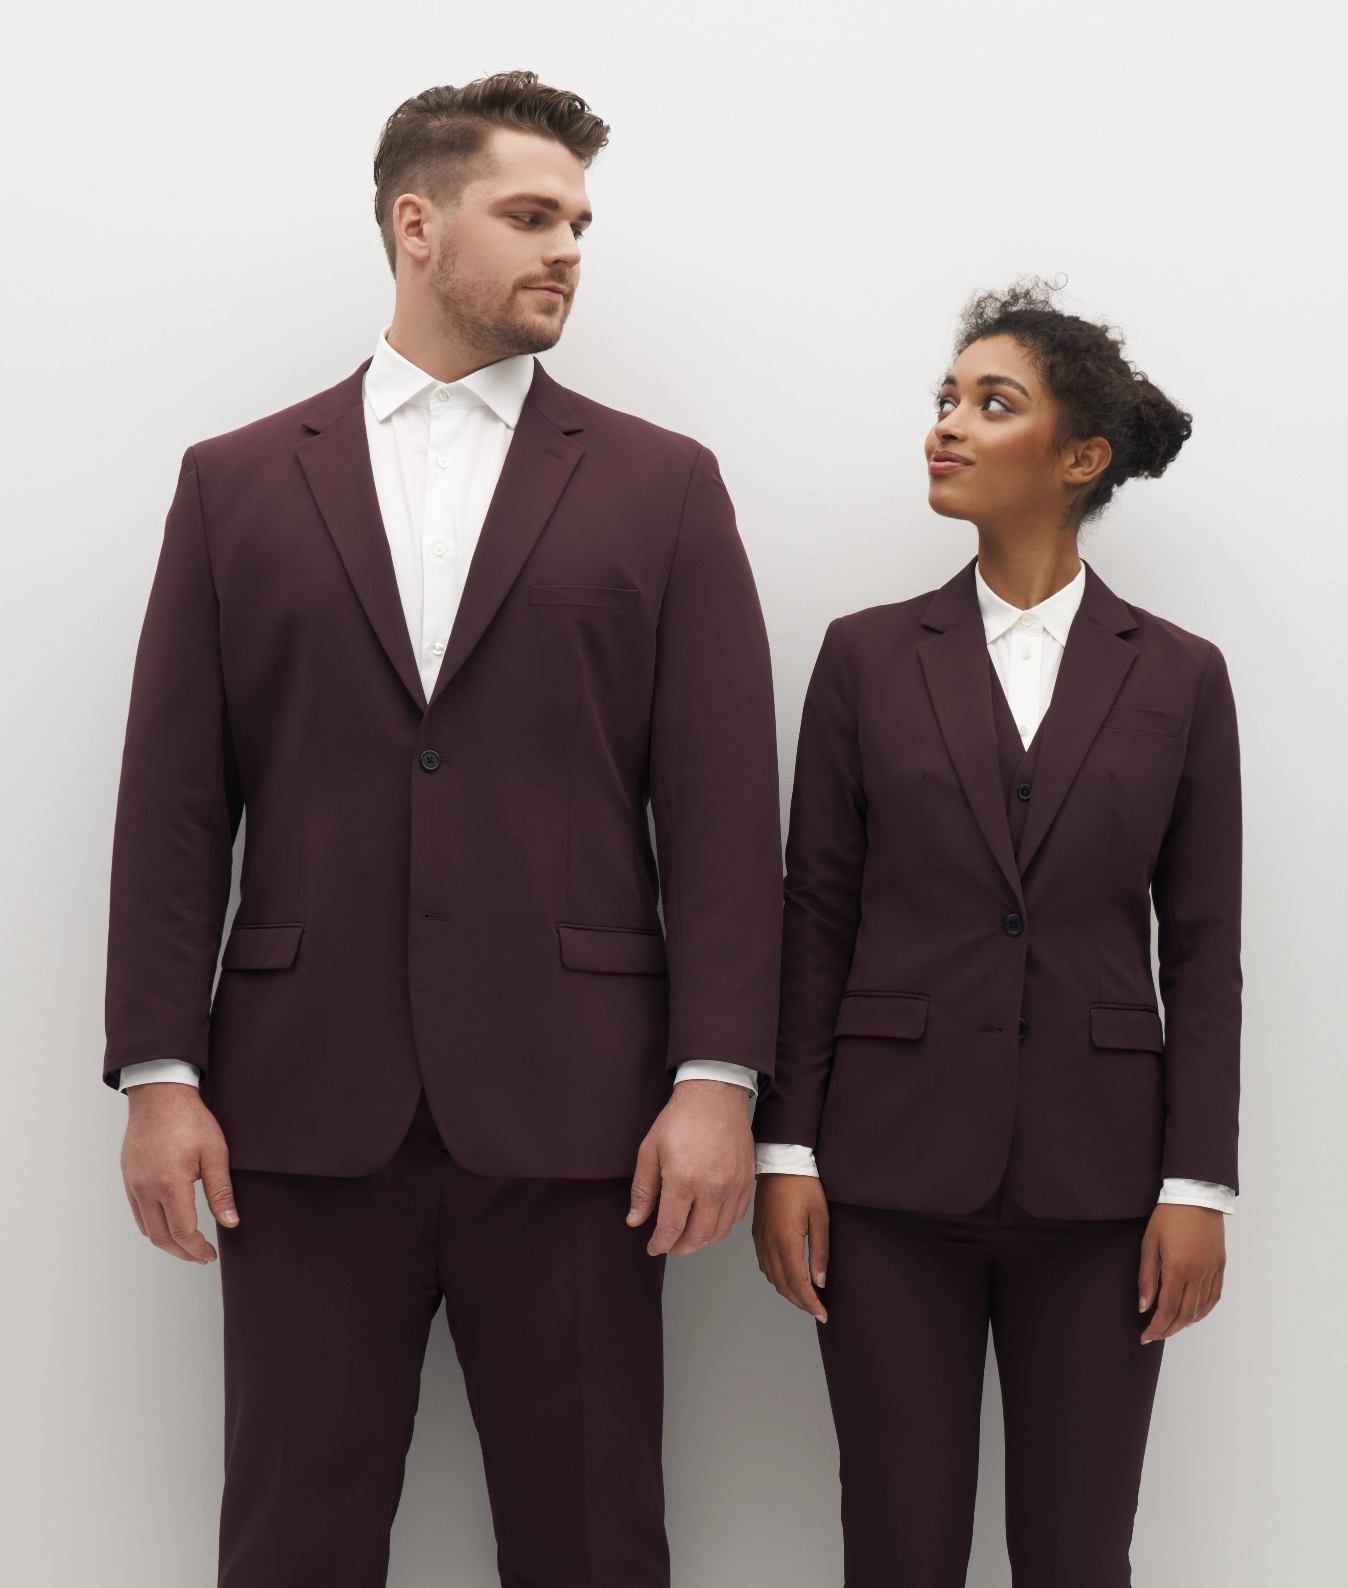 A large man and petite woman wear matching SuitShop burgundy jackets.